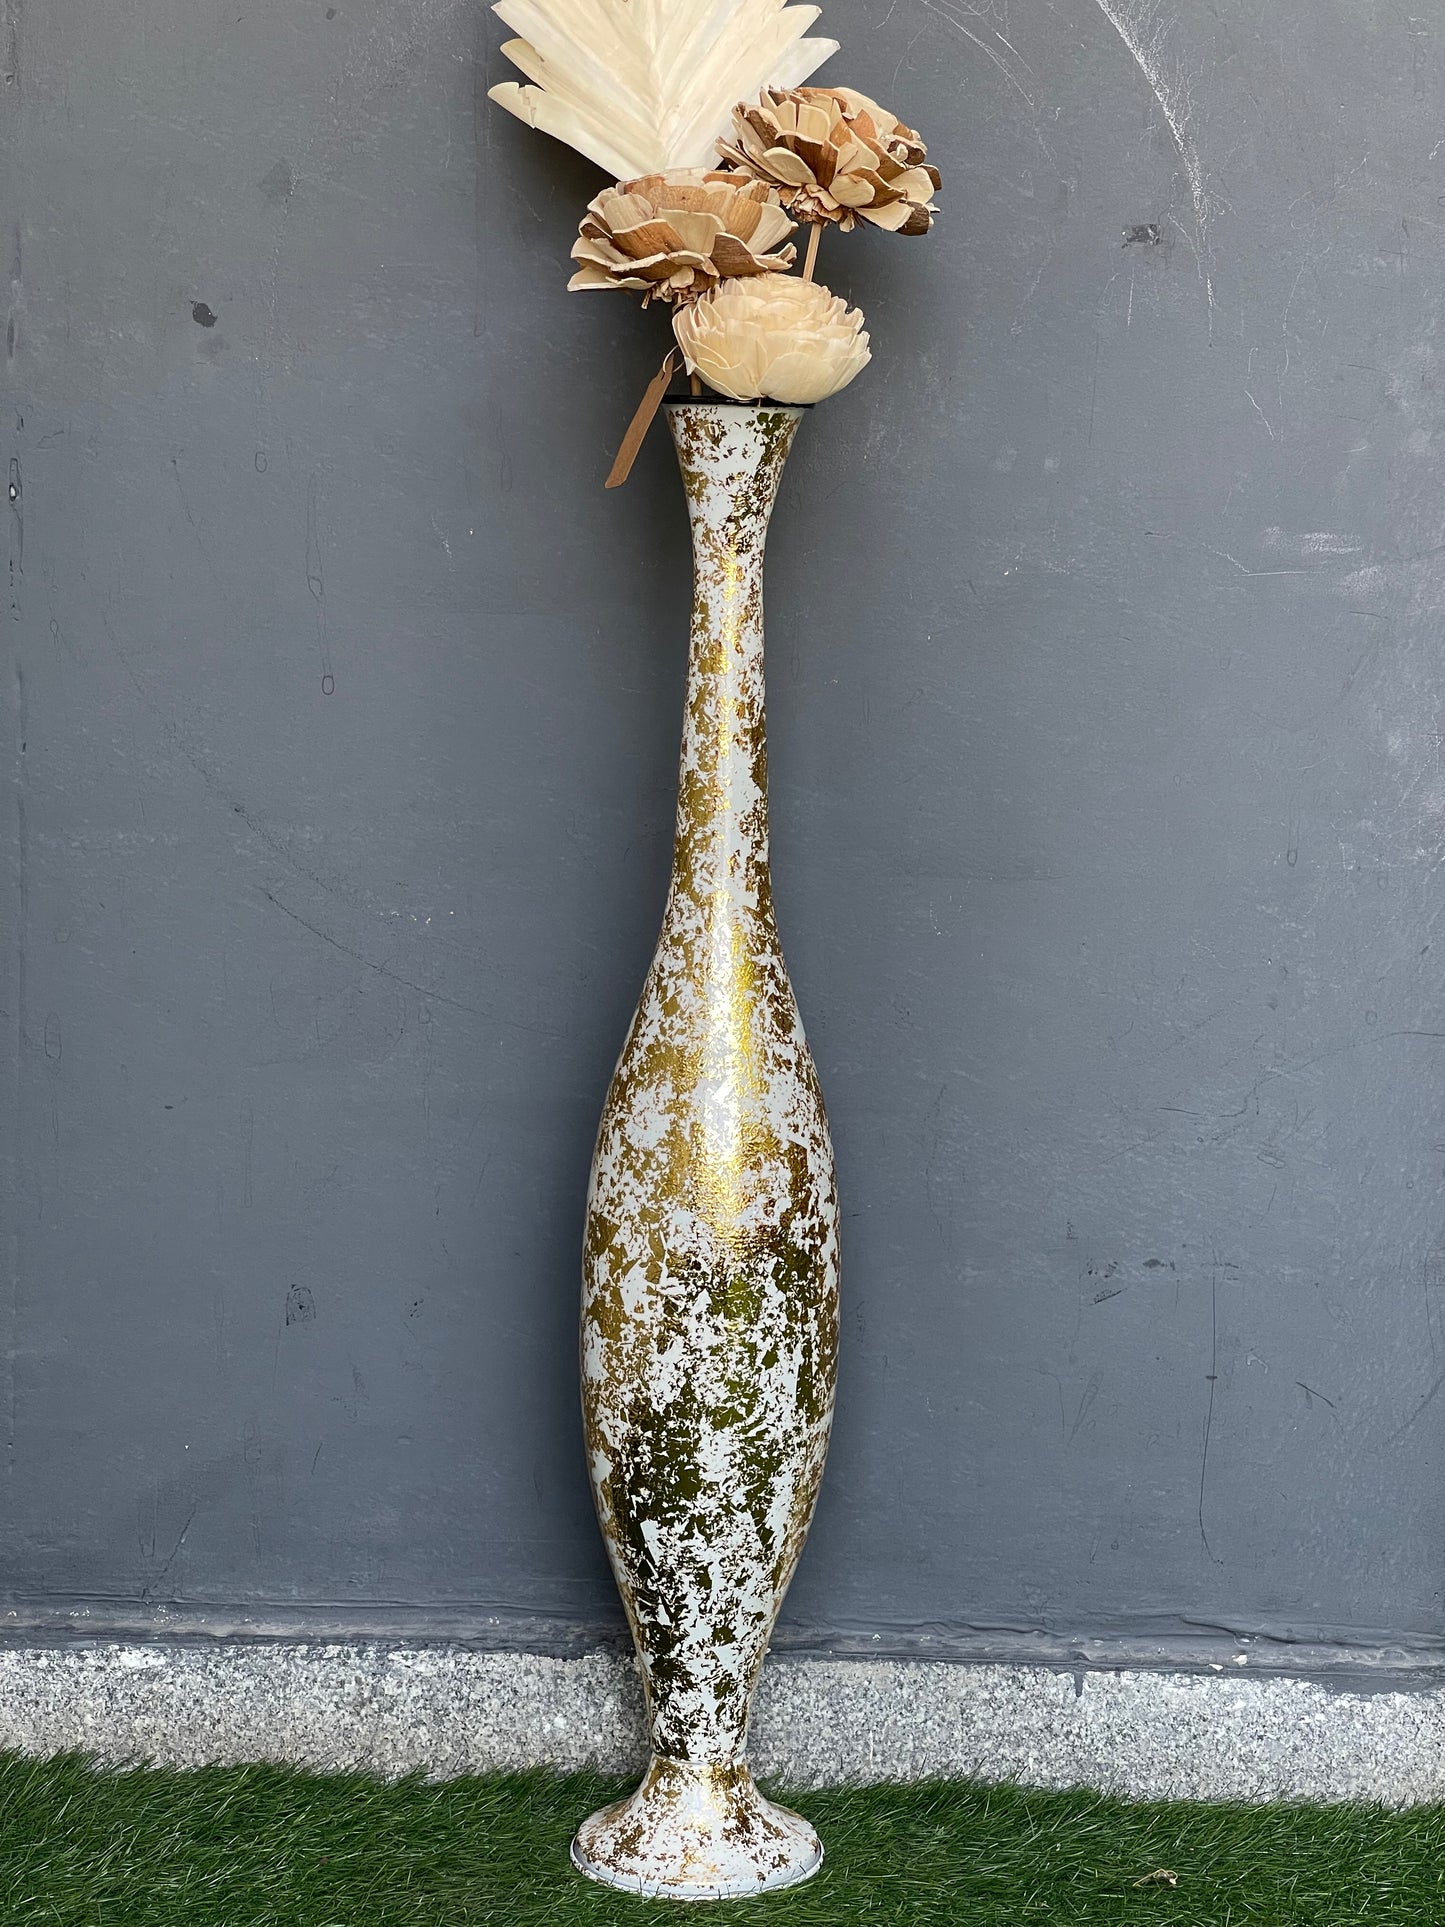 White 2.5 ft (30 inches) long and slender metal vase with gold print